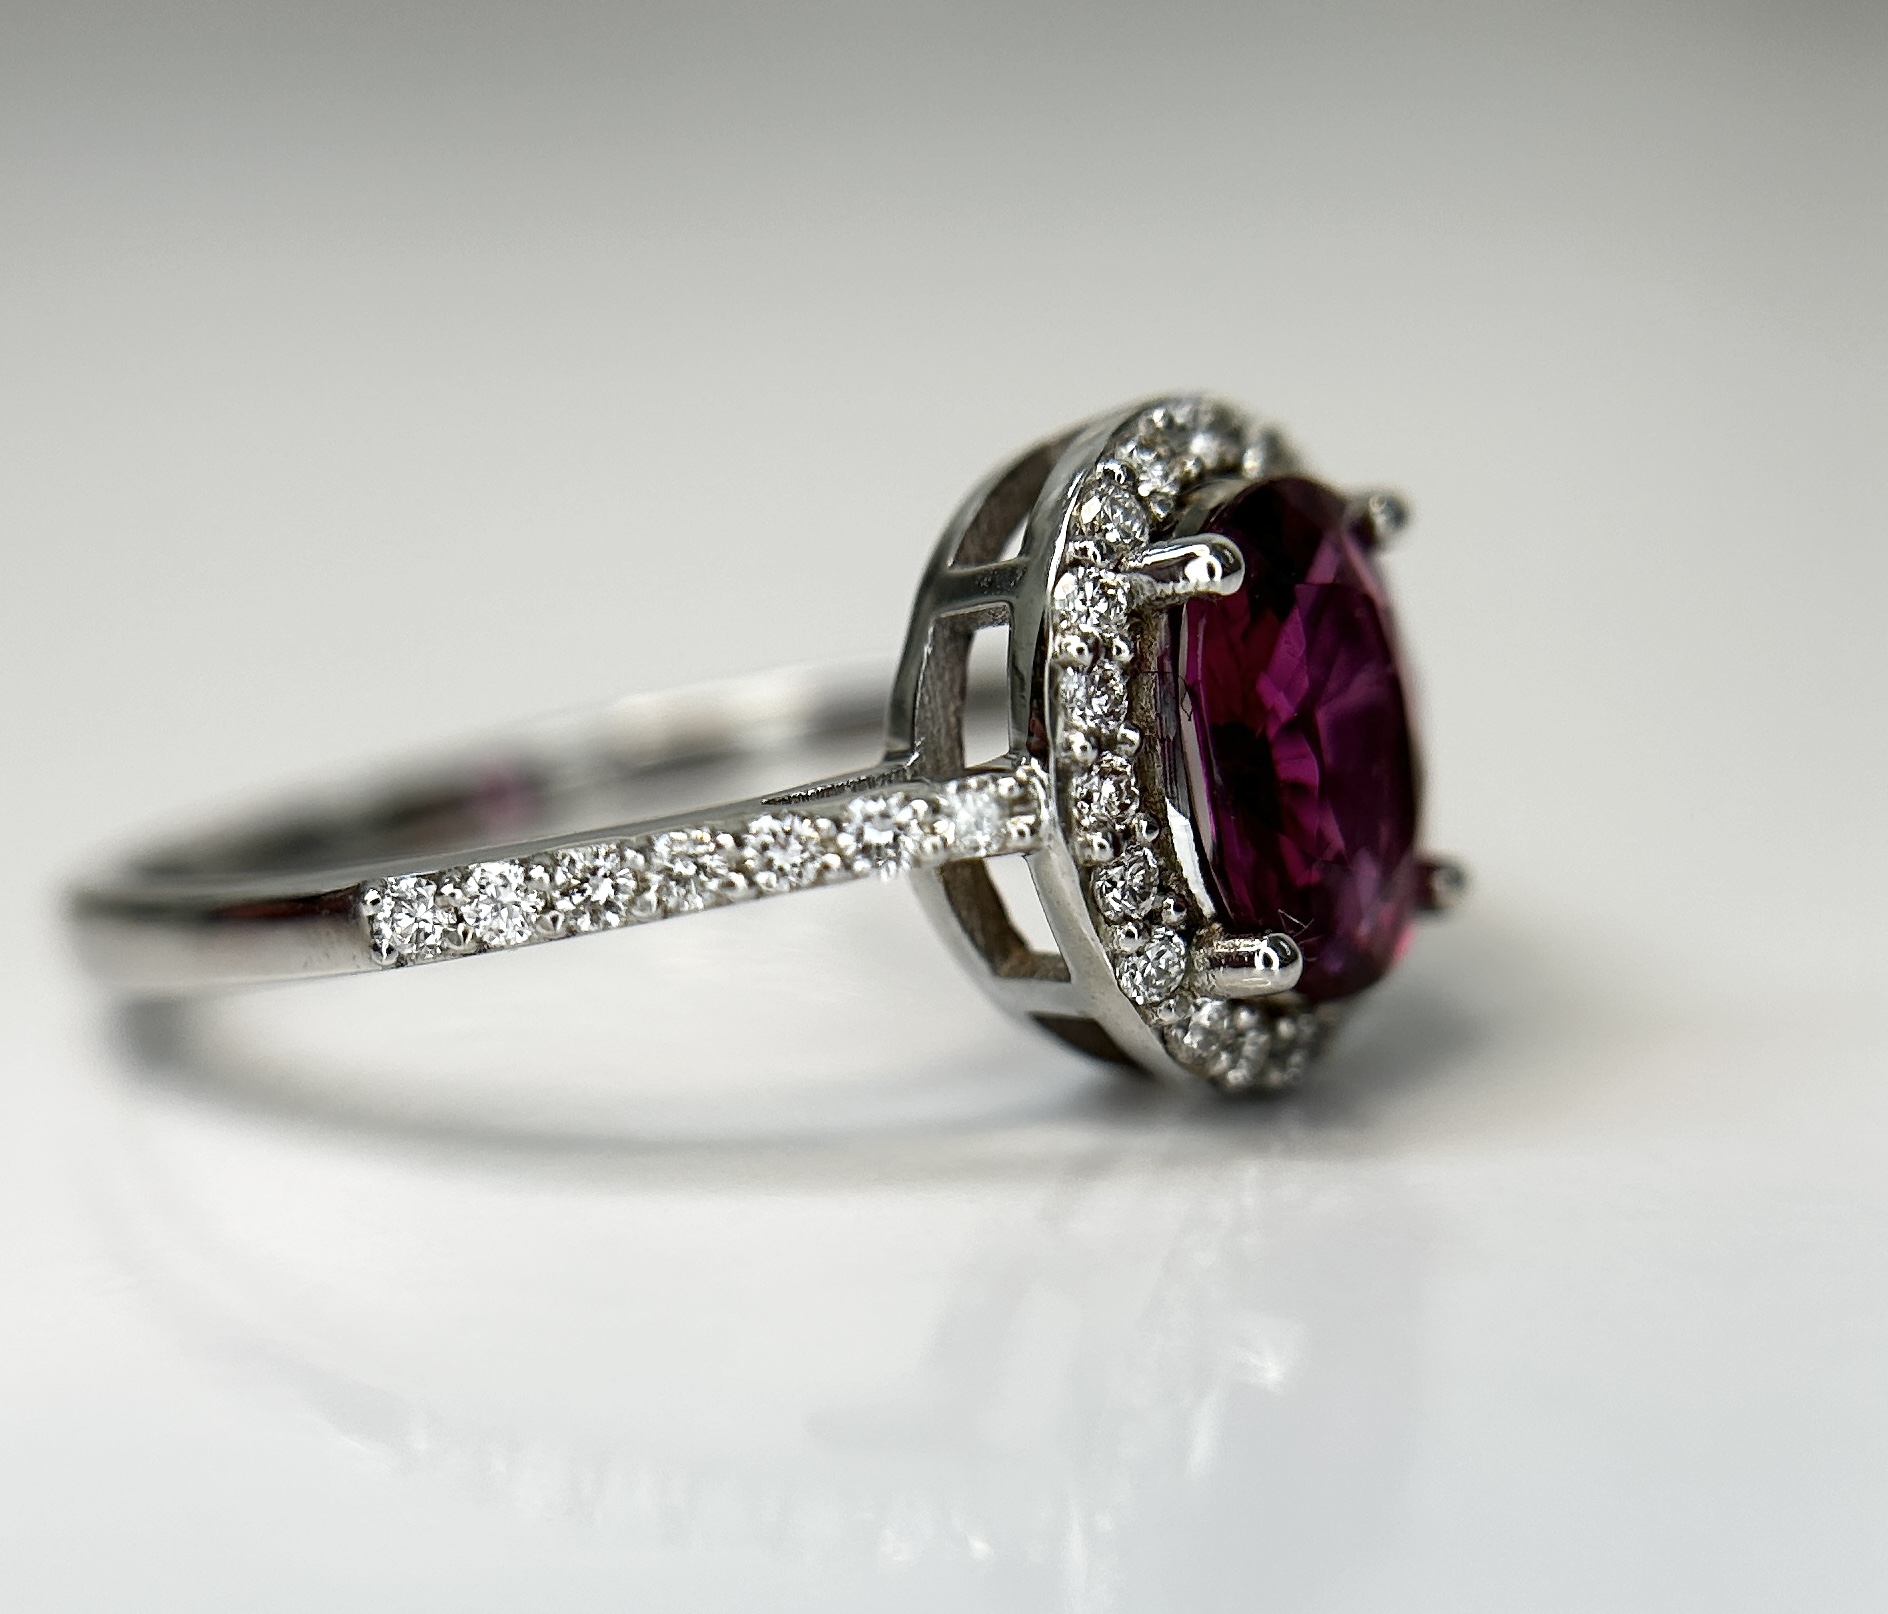 Beautiful Natural Tourmaline Rubellite Ring With Diamonds and 18k Gold - Image 6 of 8